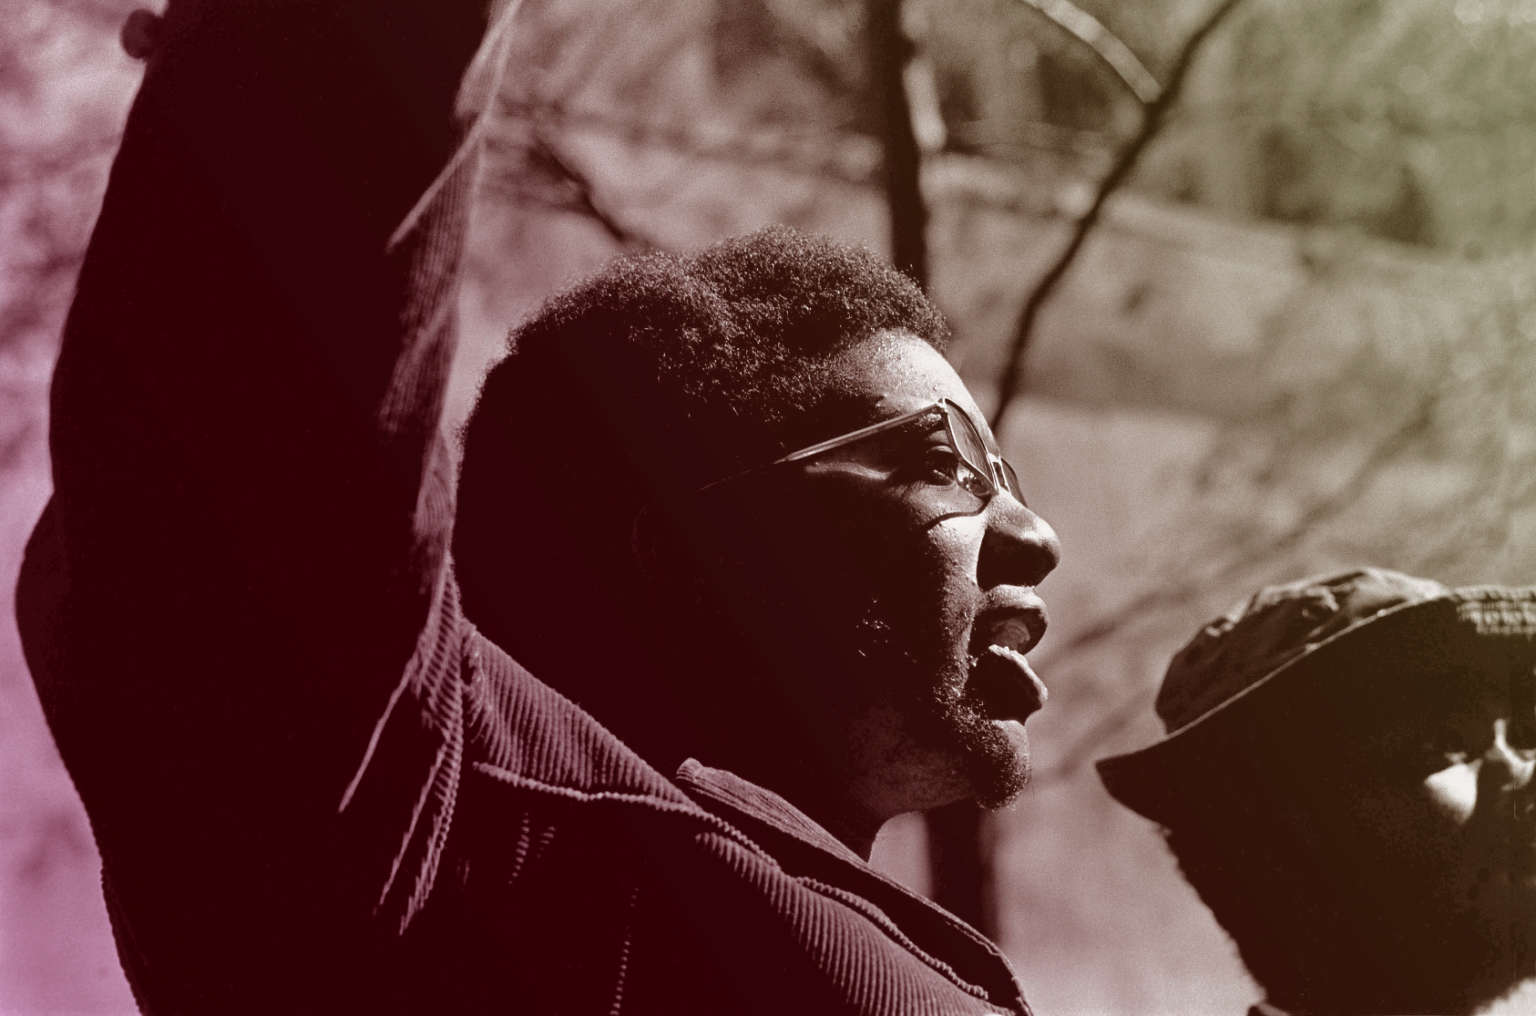 https://truthout.org/wp-content/uploads/2021/04/2021_0402-fred-hampton-1536x1016.jpg